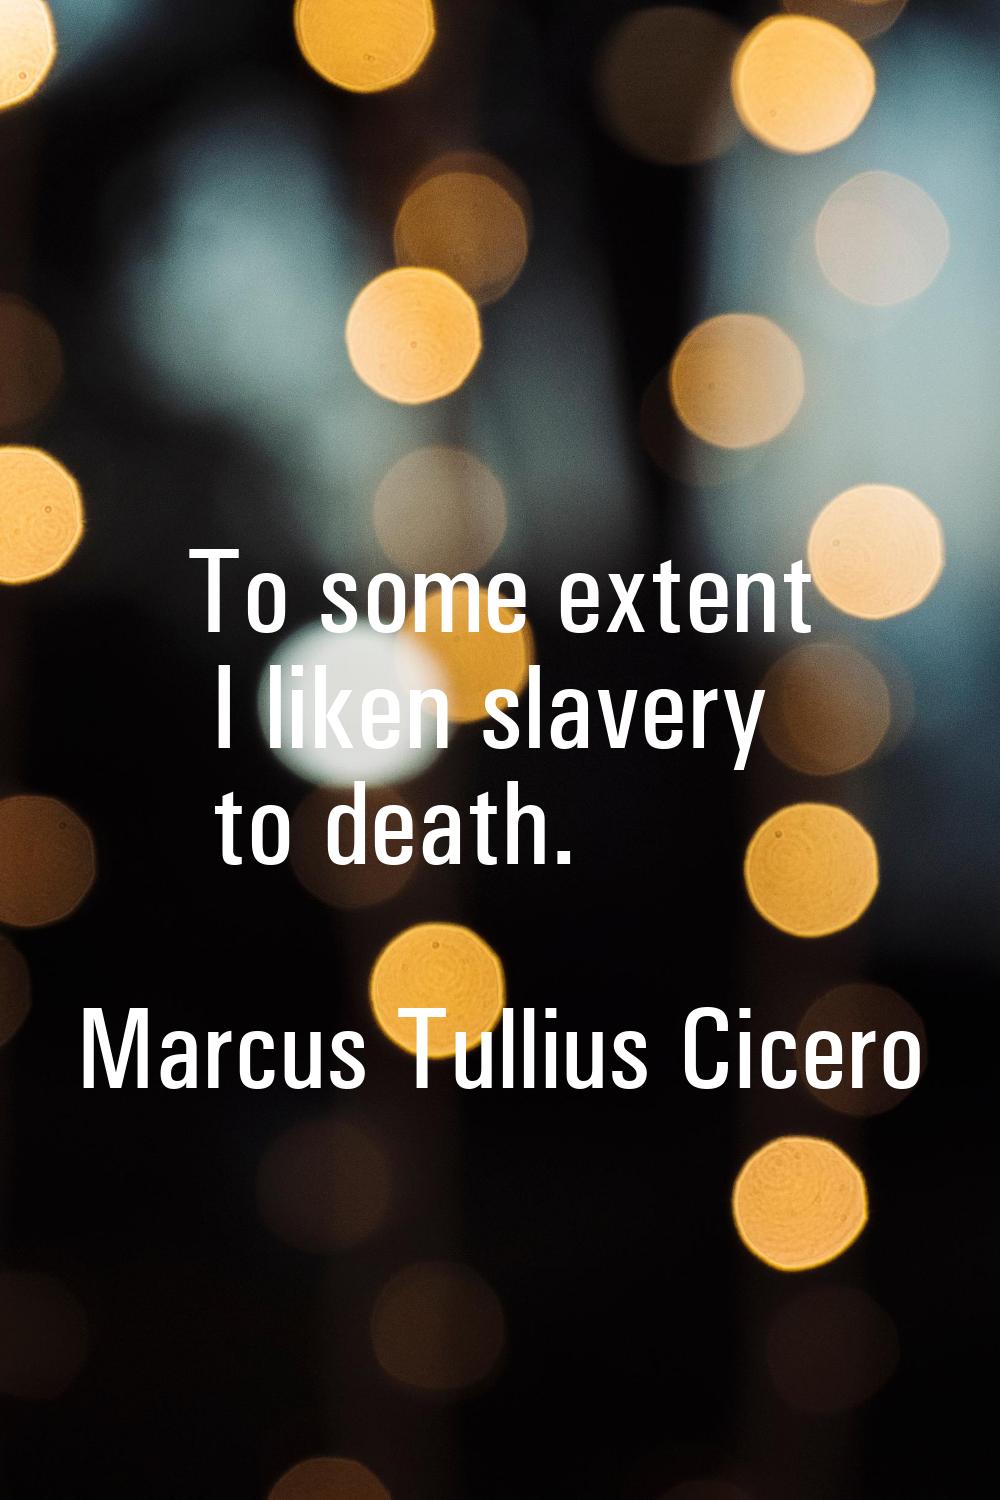 To some extent I liken slavery to death.